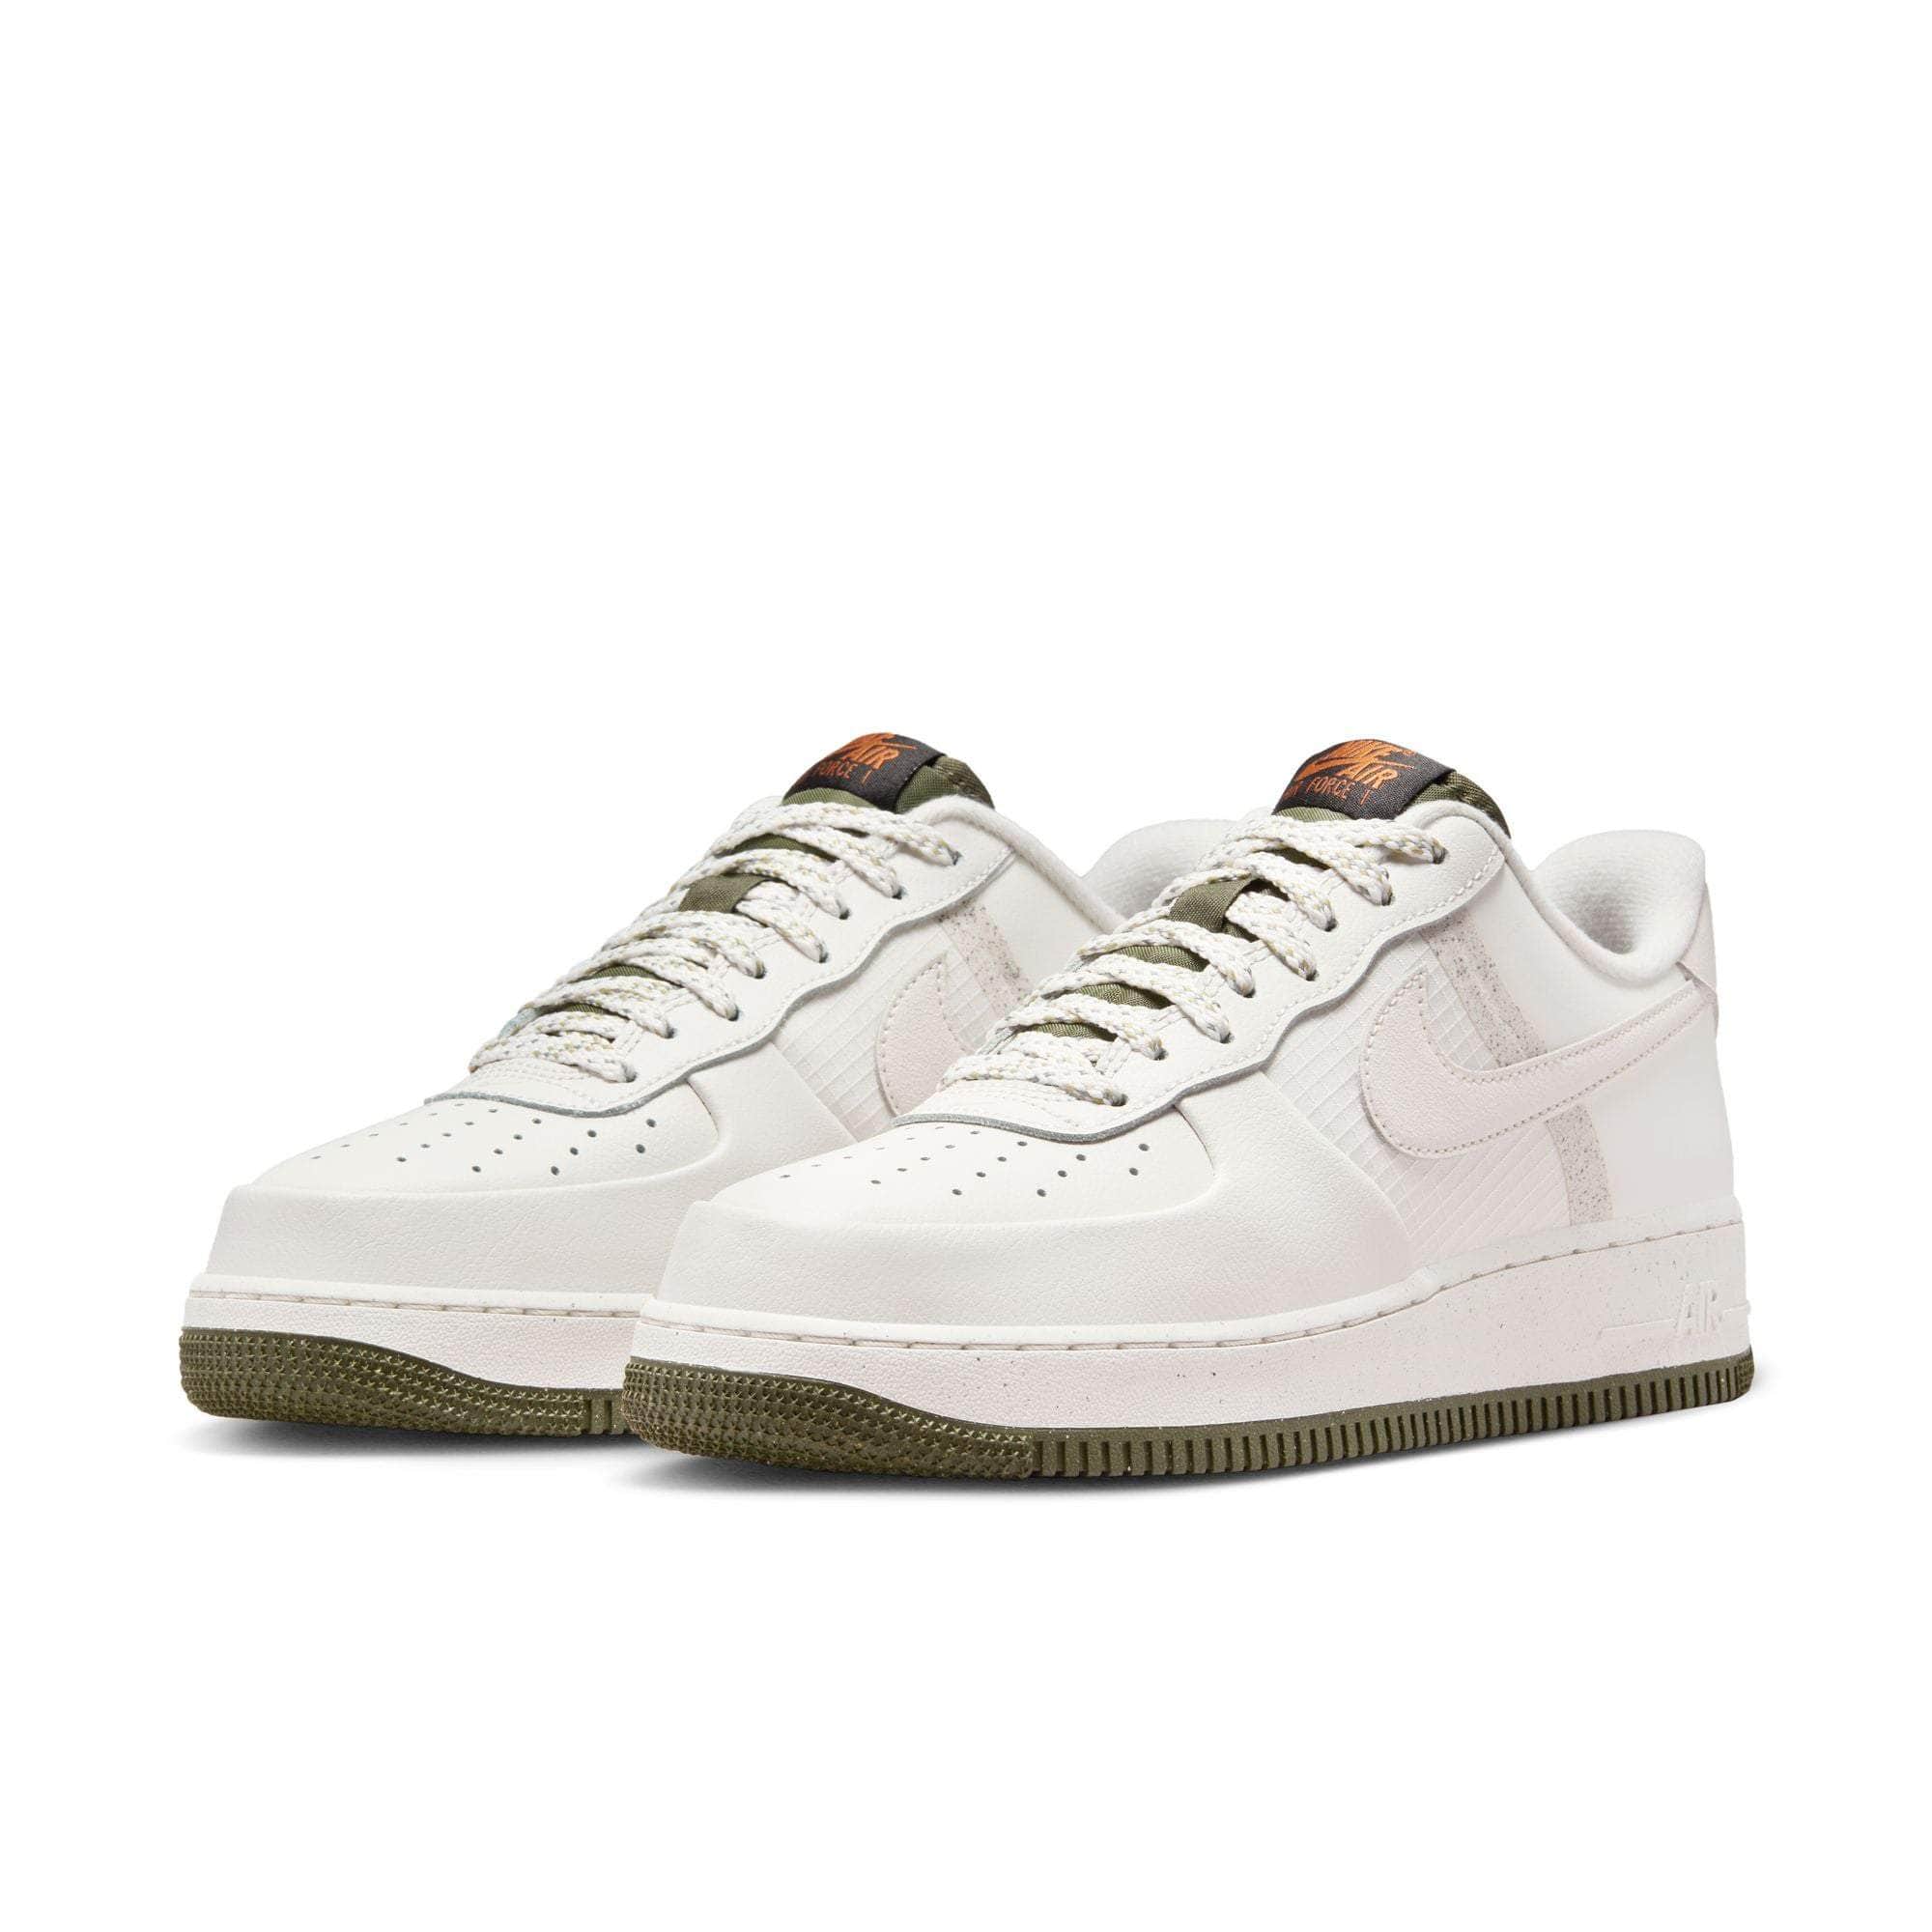 Nike Air Force 1 '07 Shoes